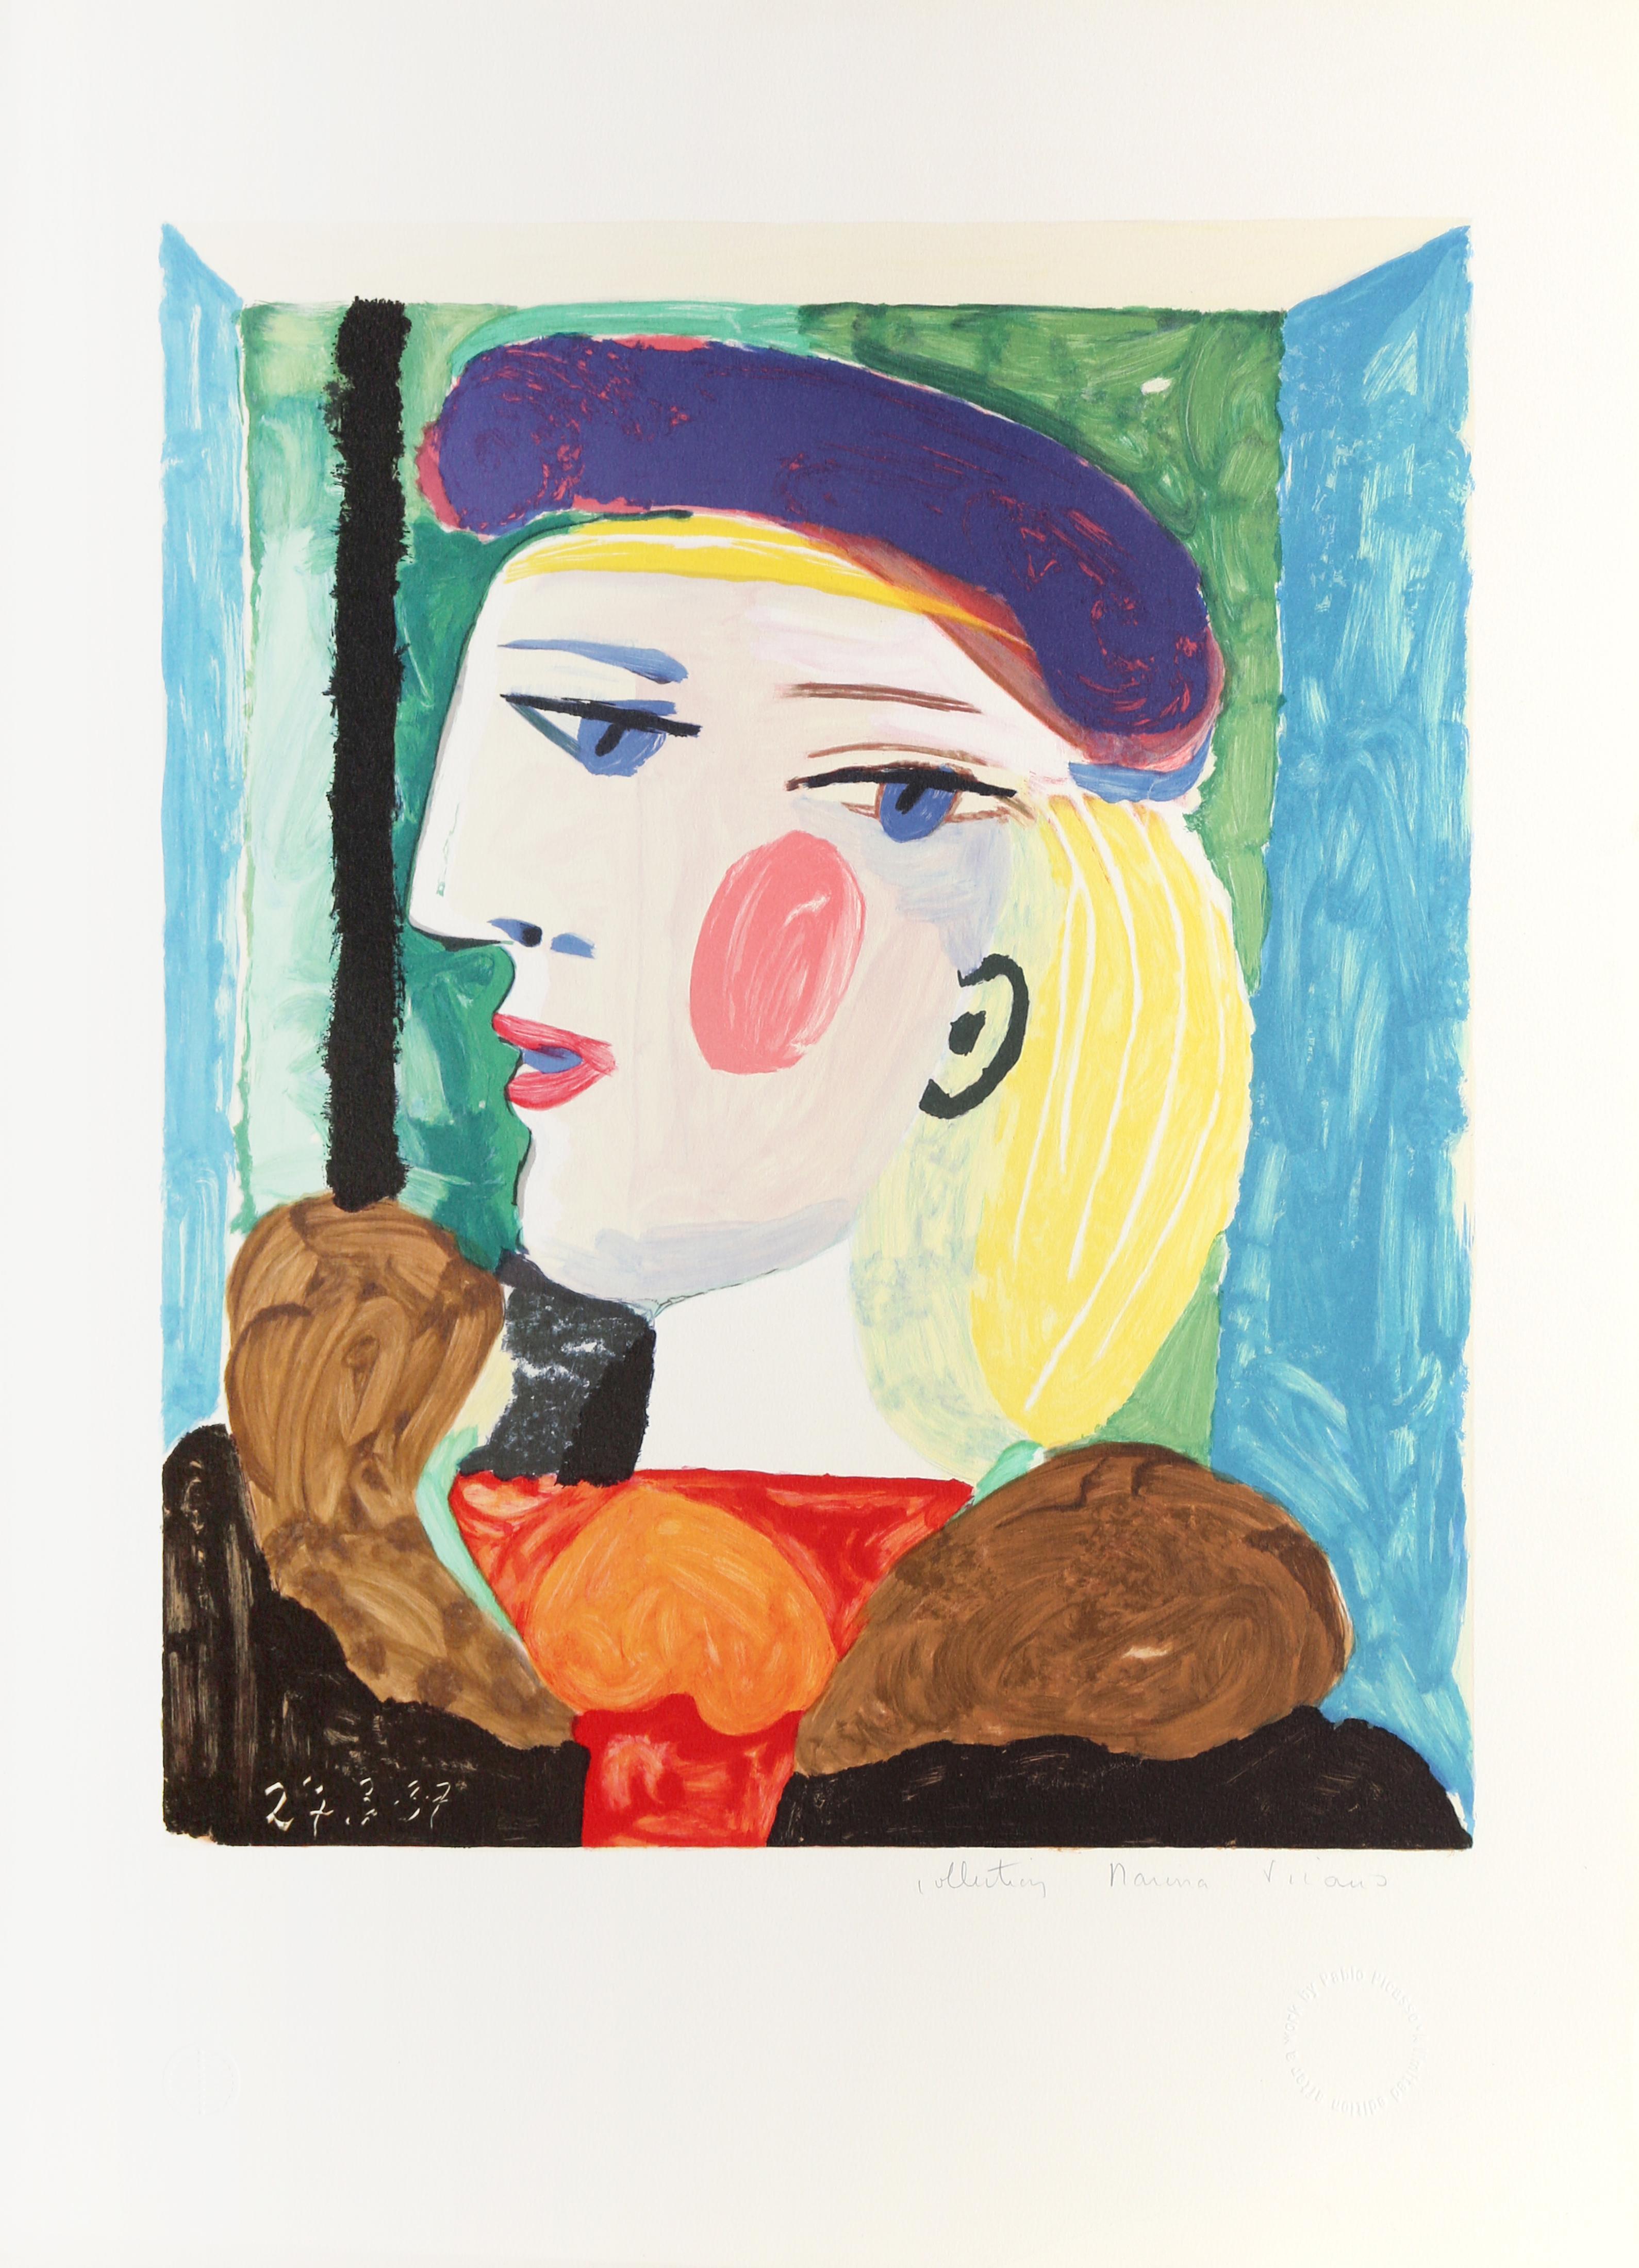 Pablo Picasso Figurative Print - Femme Profile (Marie-Therese Walter)